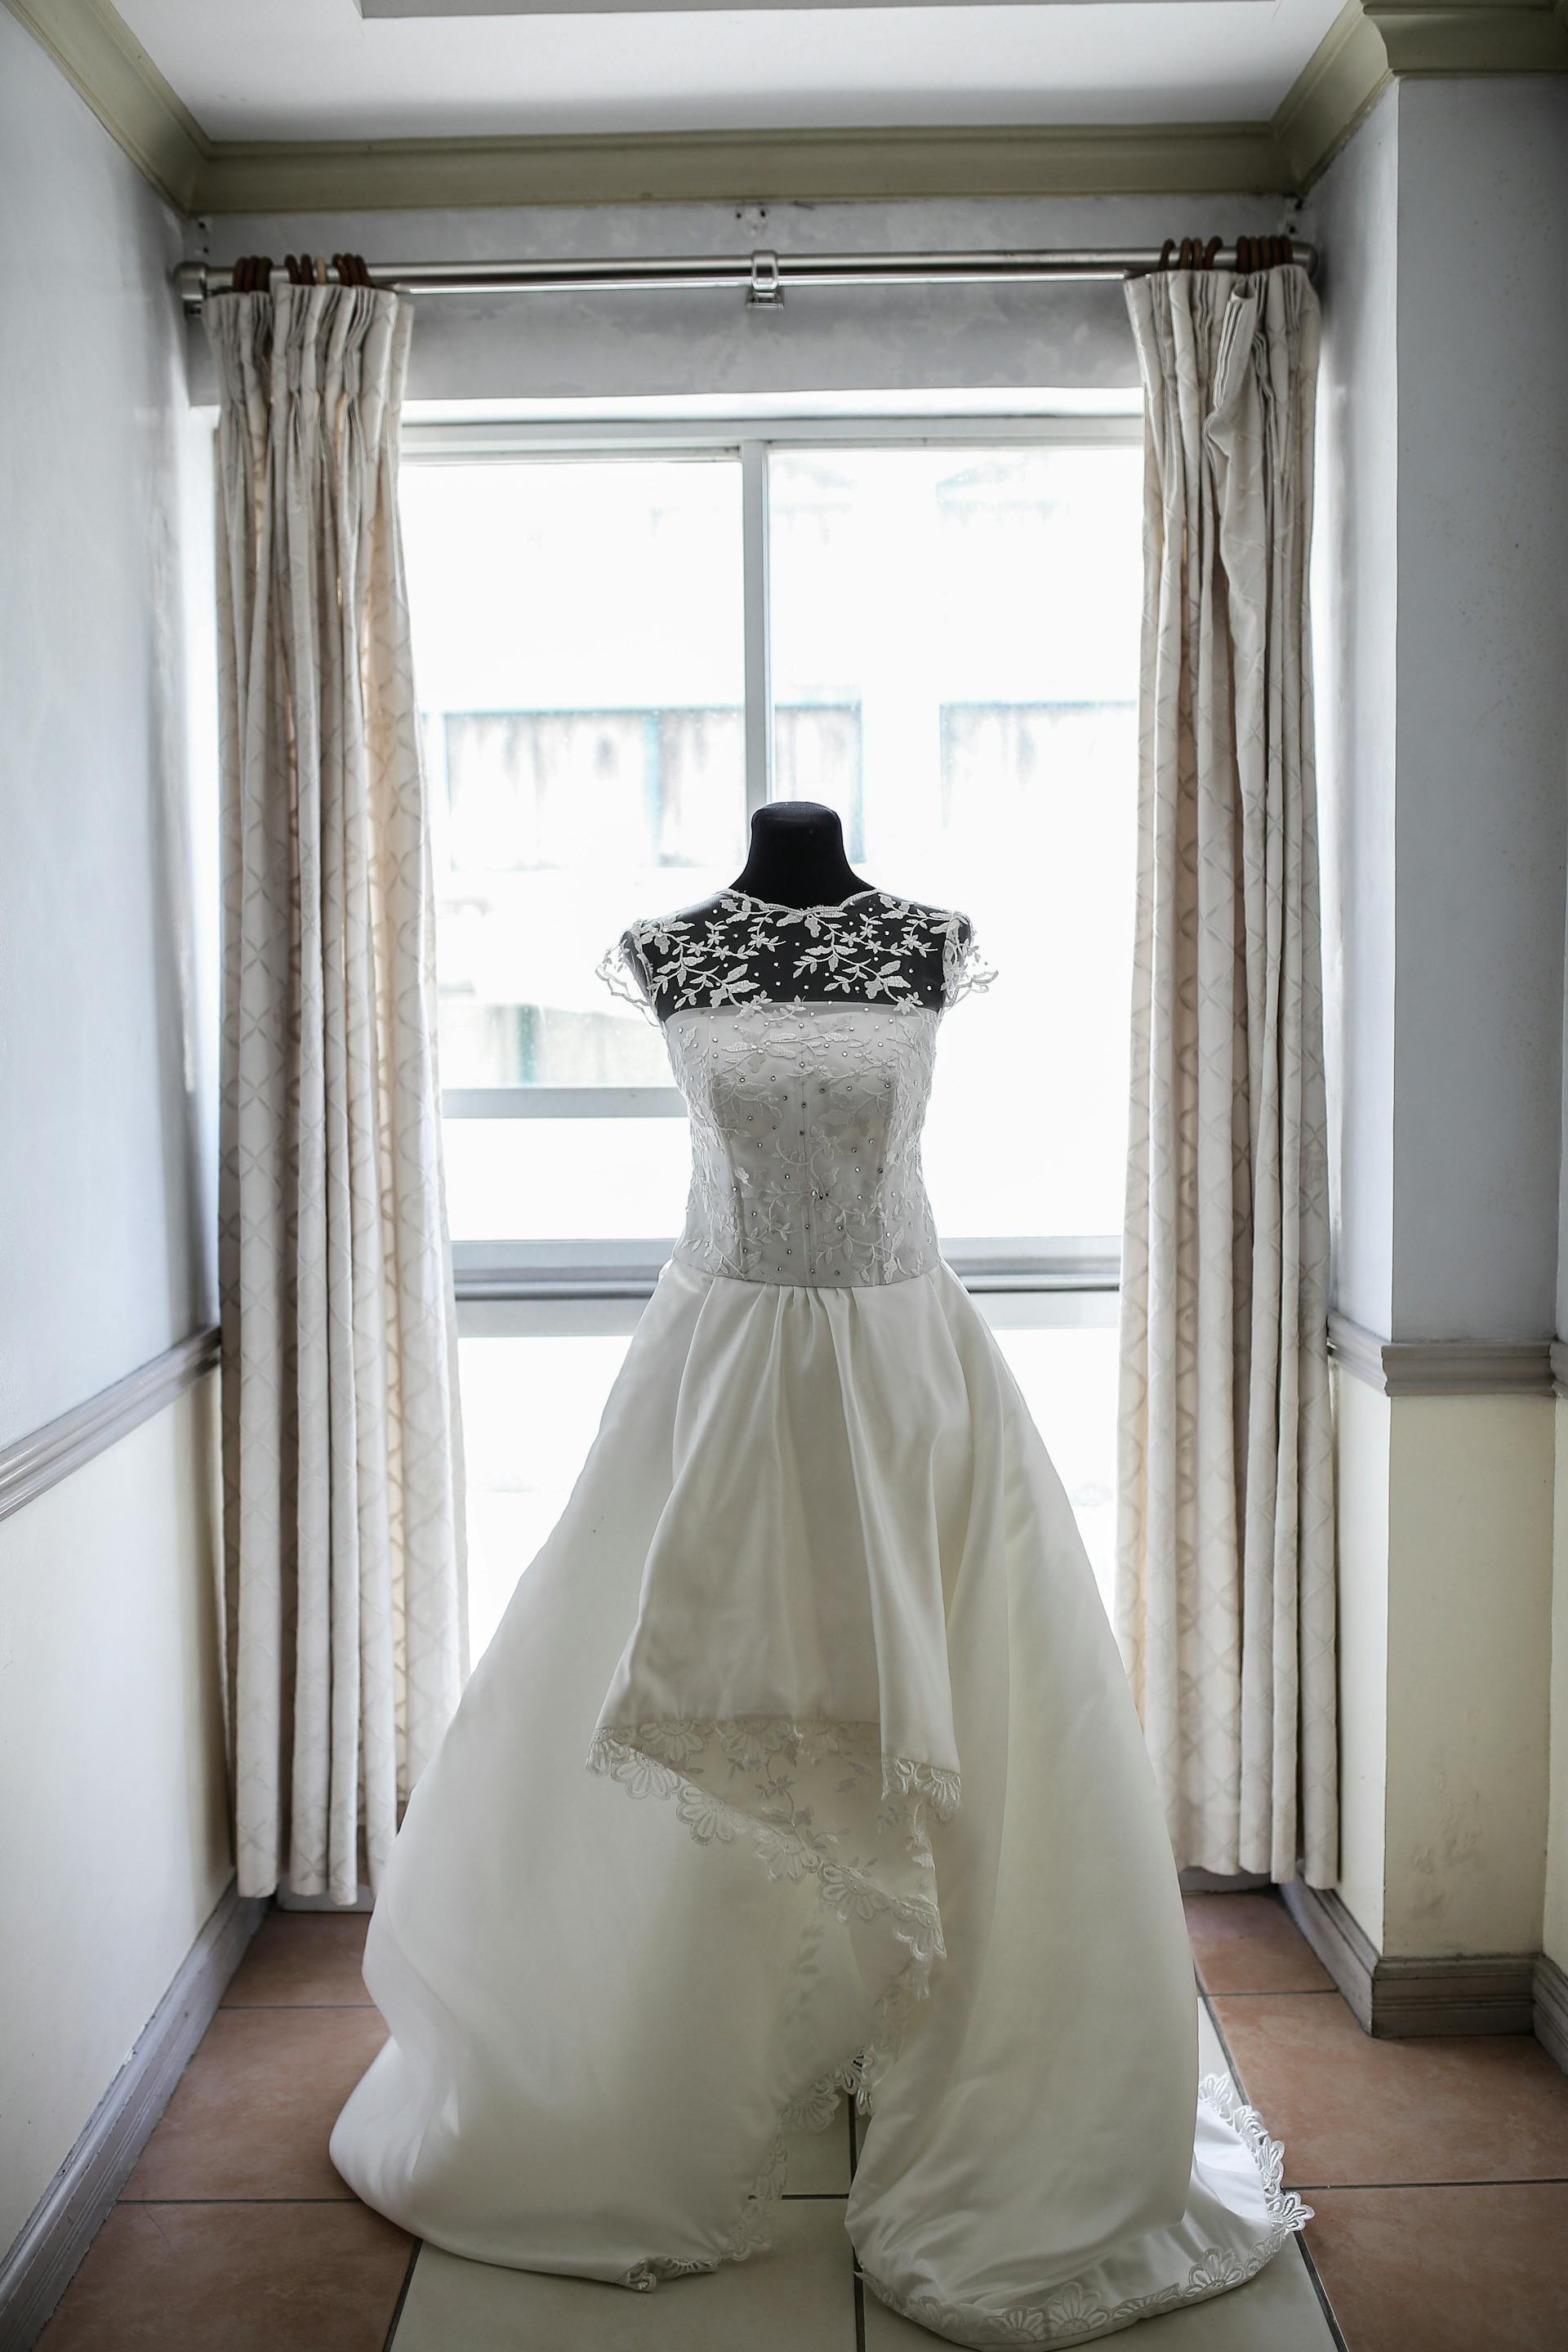 A wedding gown on a mannequin | Source: Pexels